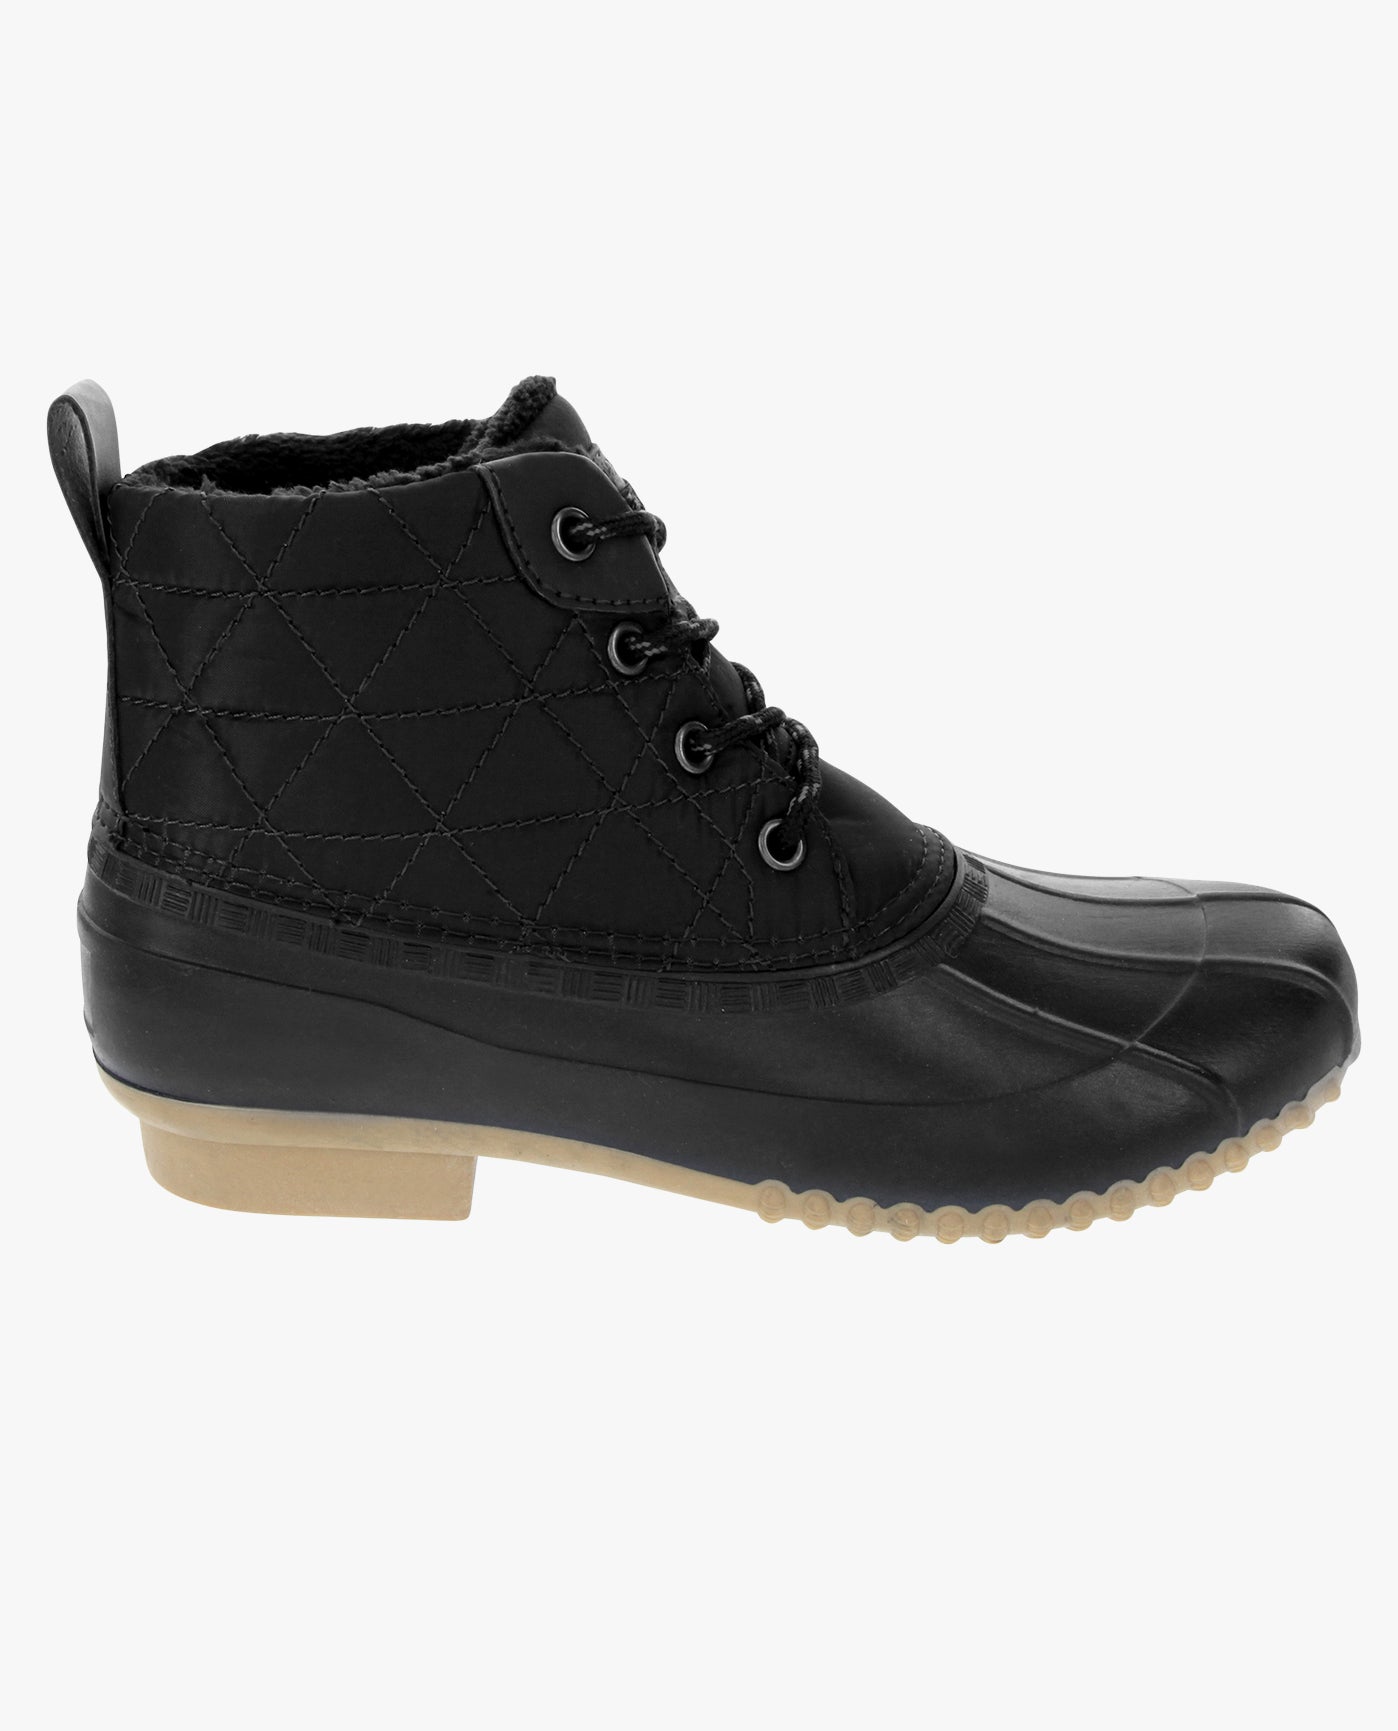 SIDE VIEW  OF WOMENS WINLEY DUCK BOOT | ESO_BLACK_001